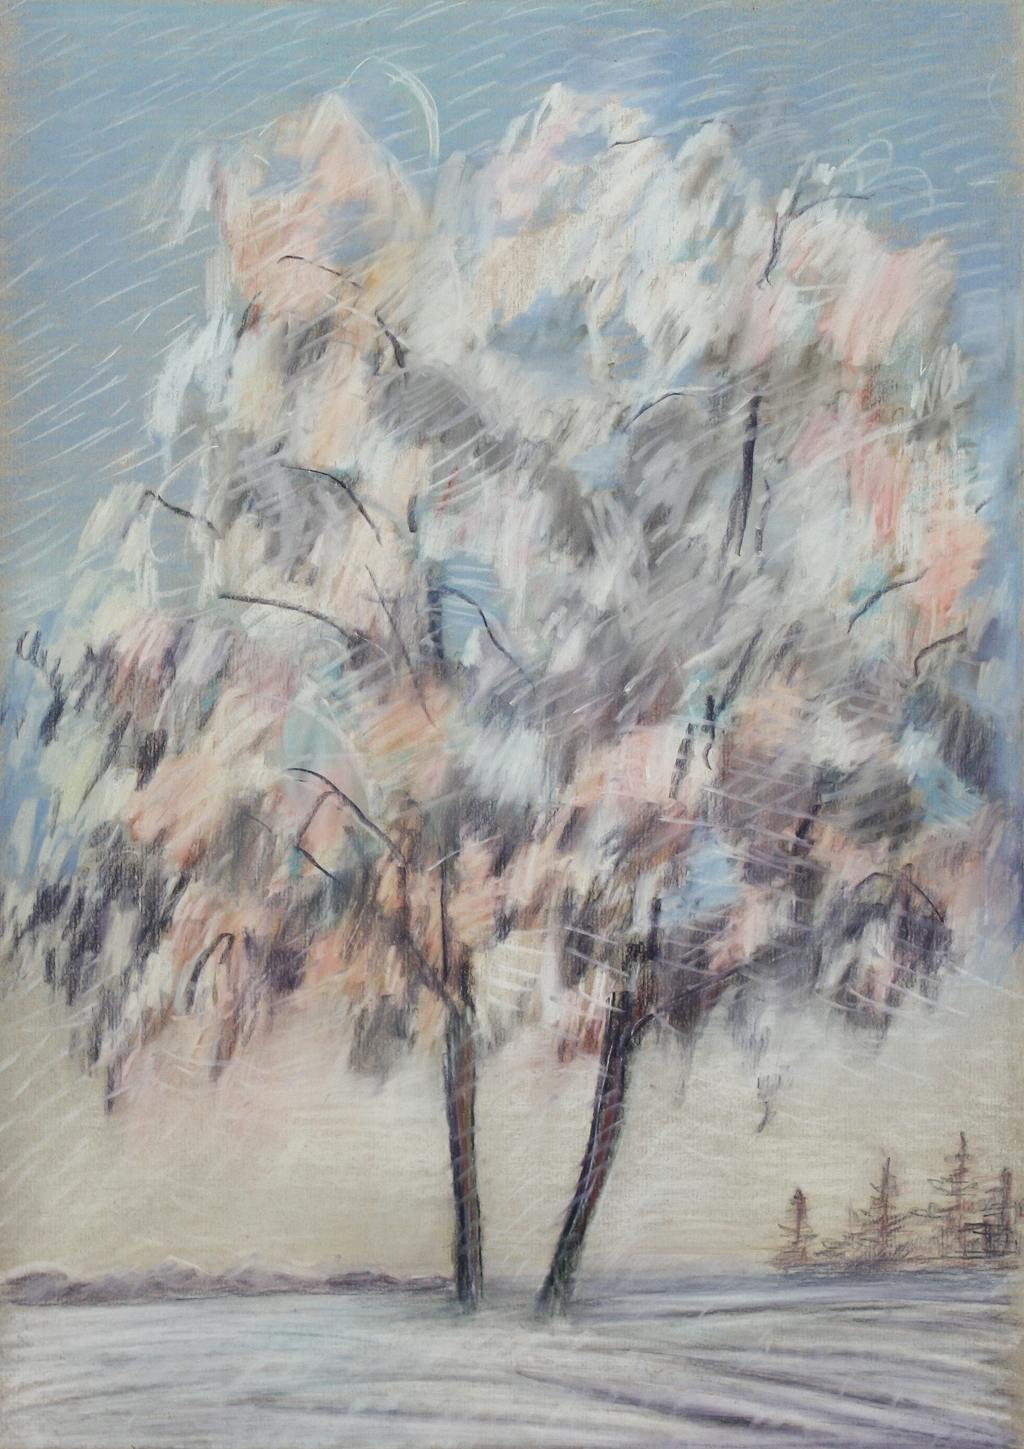 Painting "Winter", painted by Elena Birkenwald in 2000